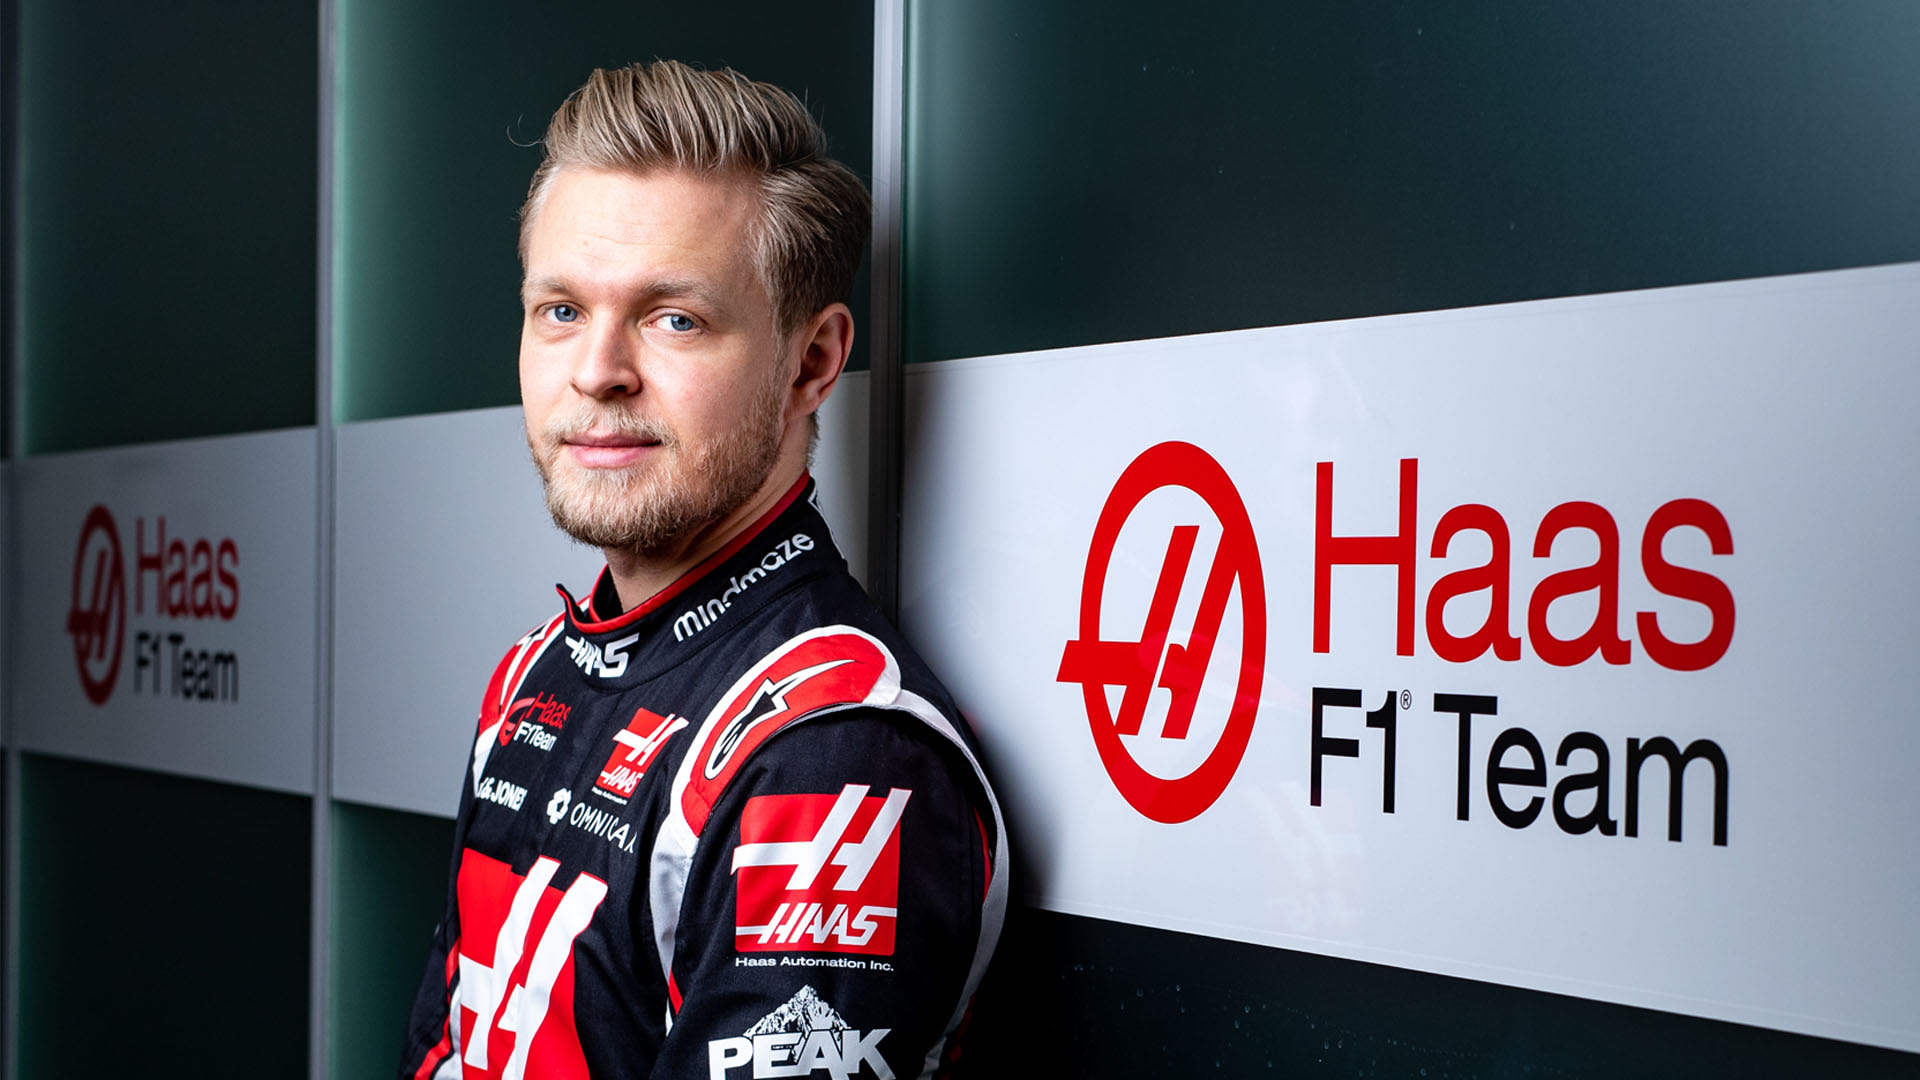 Kevin Magnussen returned to Formula One in 2016, driving for the new Haas F1 Team.